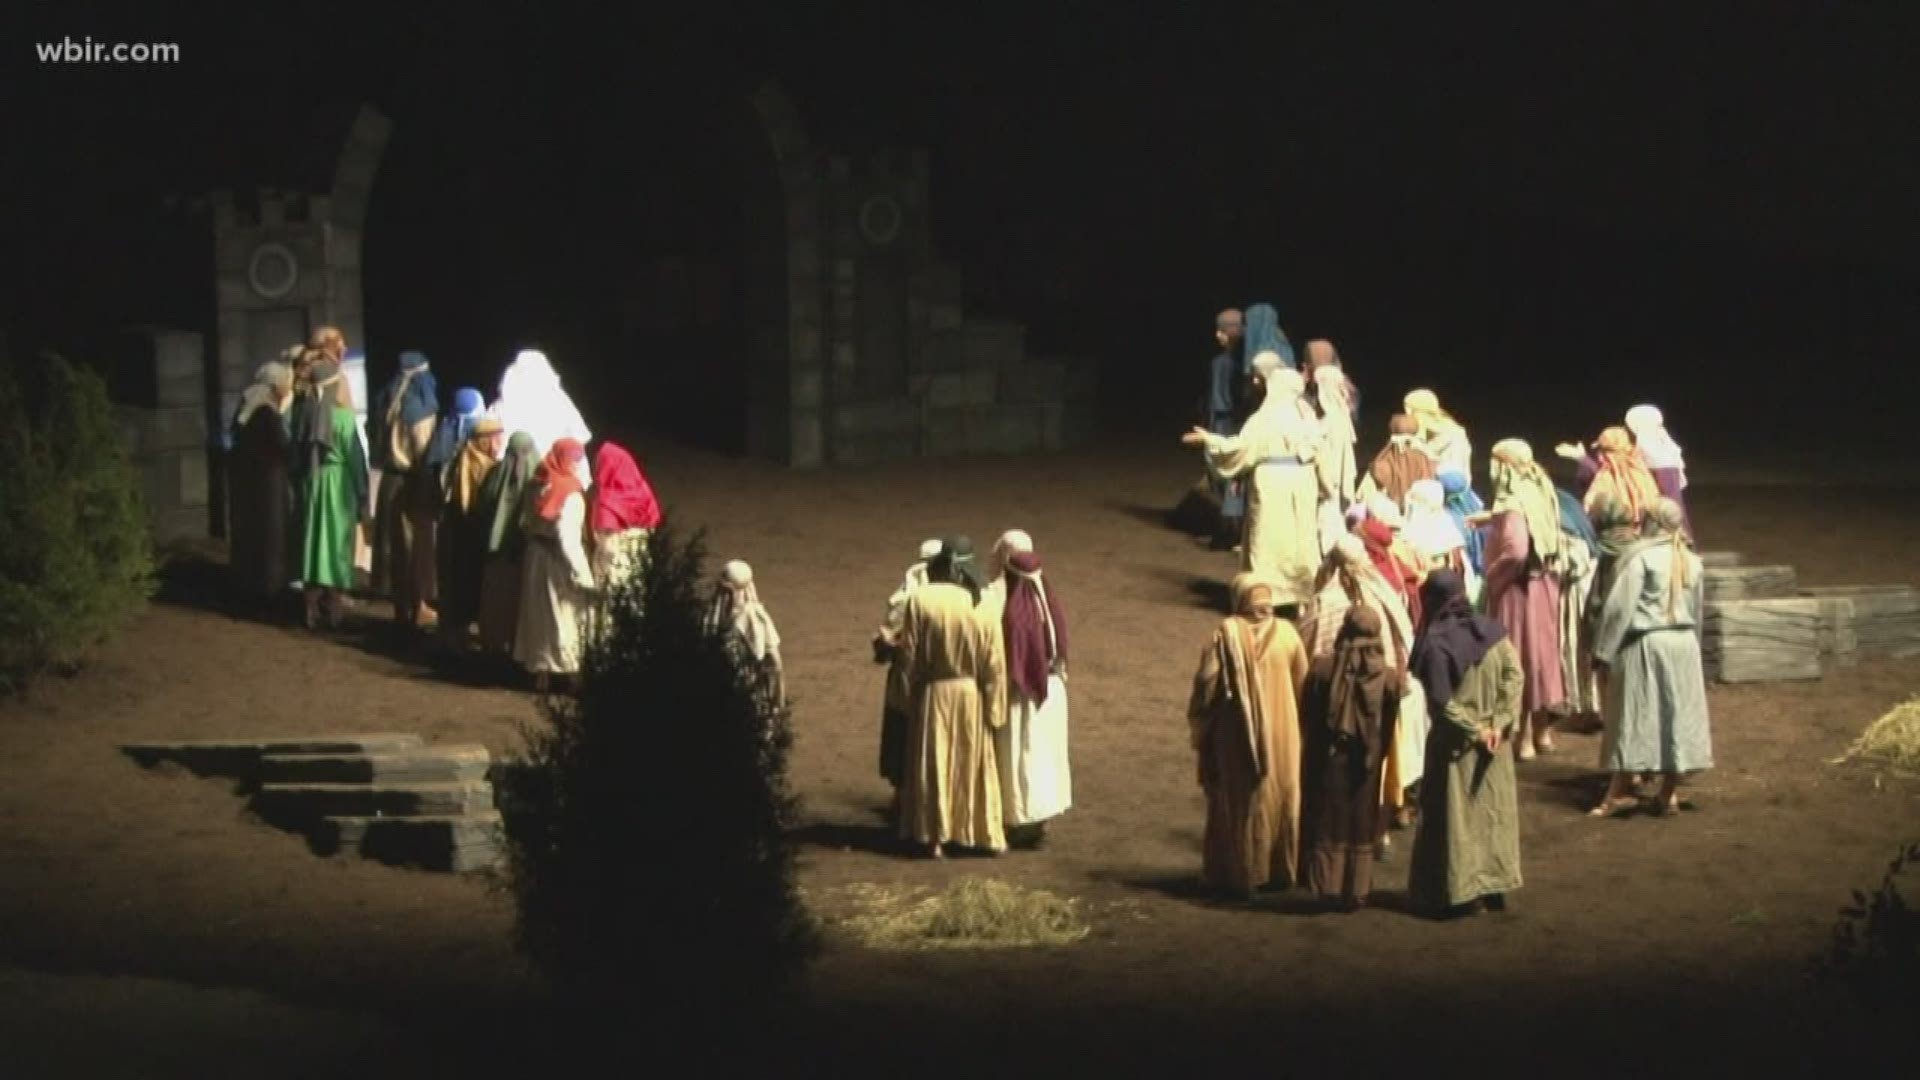 The Nativity Pageant of Knoxville runs Dec. 14 & 15 (3pm) and Dec. 16 at 7pm at Knoxville's Civic Coliseum. Dec. 13, 2019-4pm.